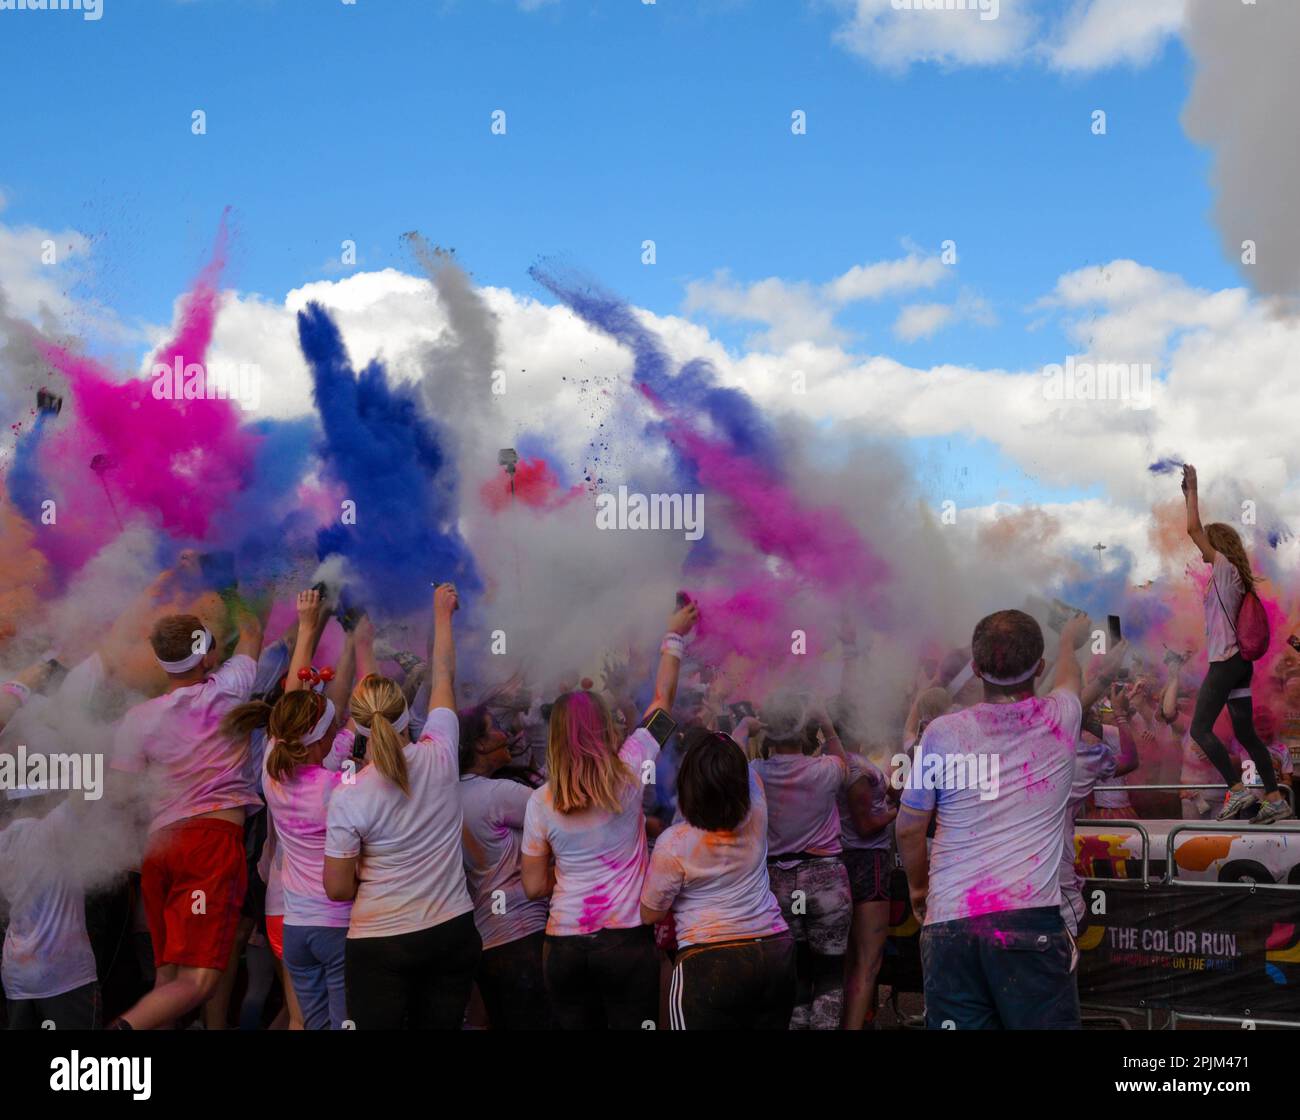 https://c8.alamy.com/comp/2PJM471/group-of-runners-at-colour-run-in-birmingham-england-uk-celebrating-at-the-end-of-the-run-by-throwing-coloured-paint-powder-2PJM471.jpg